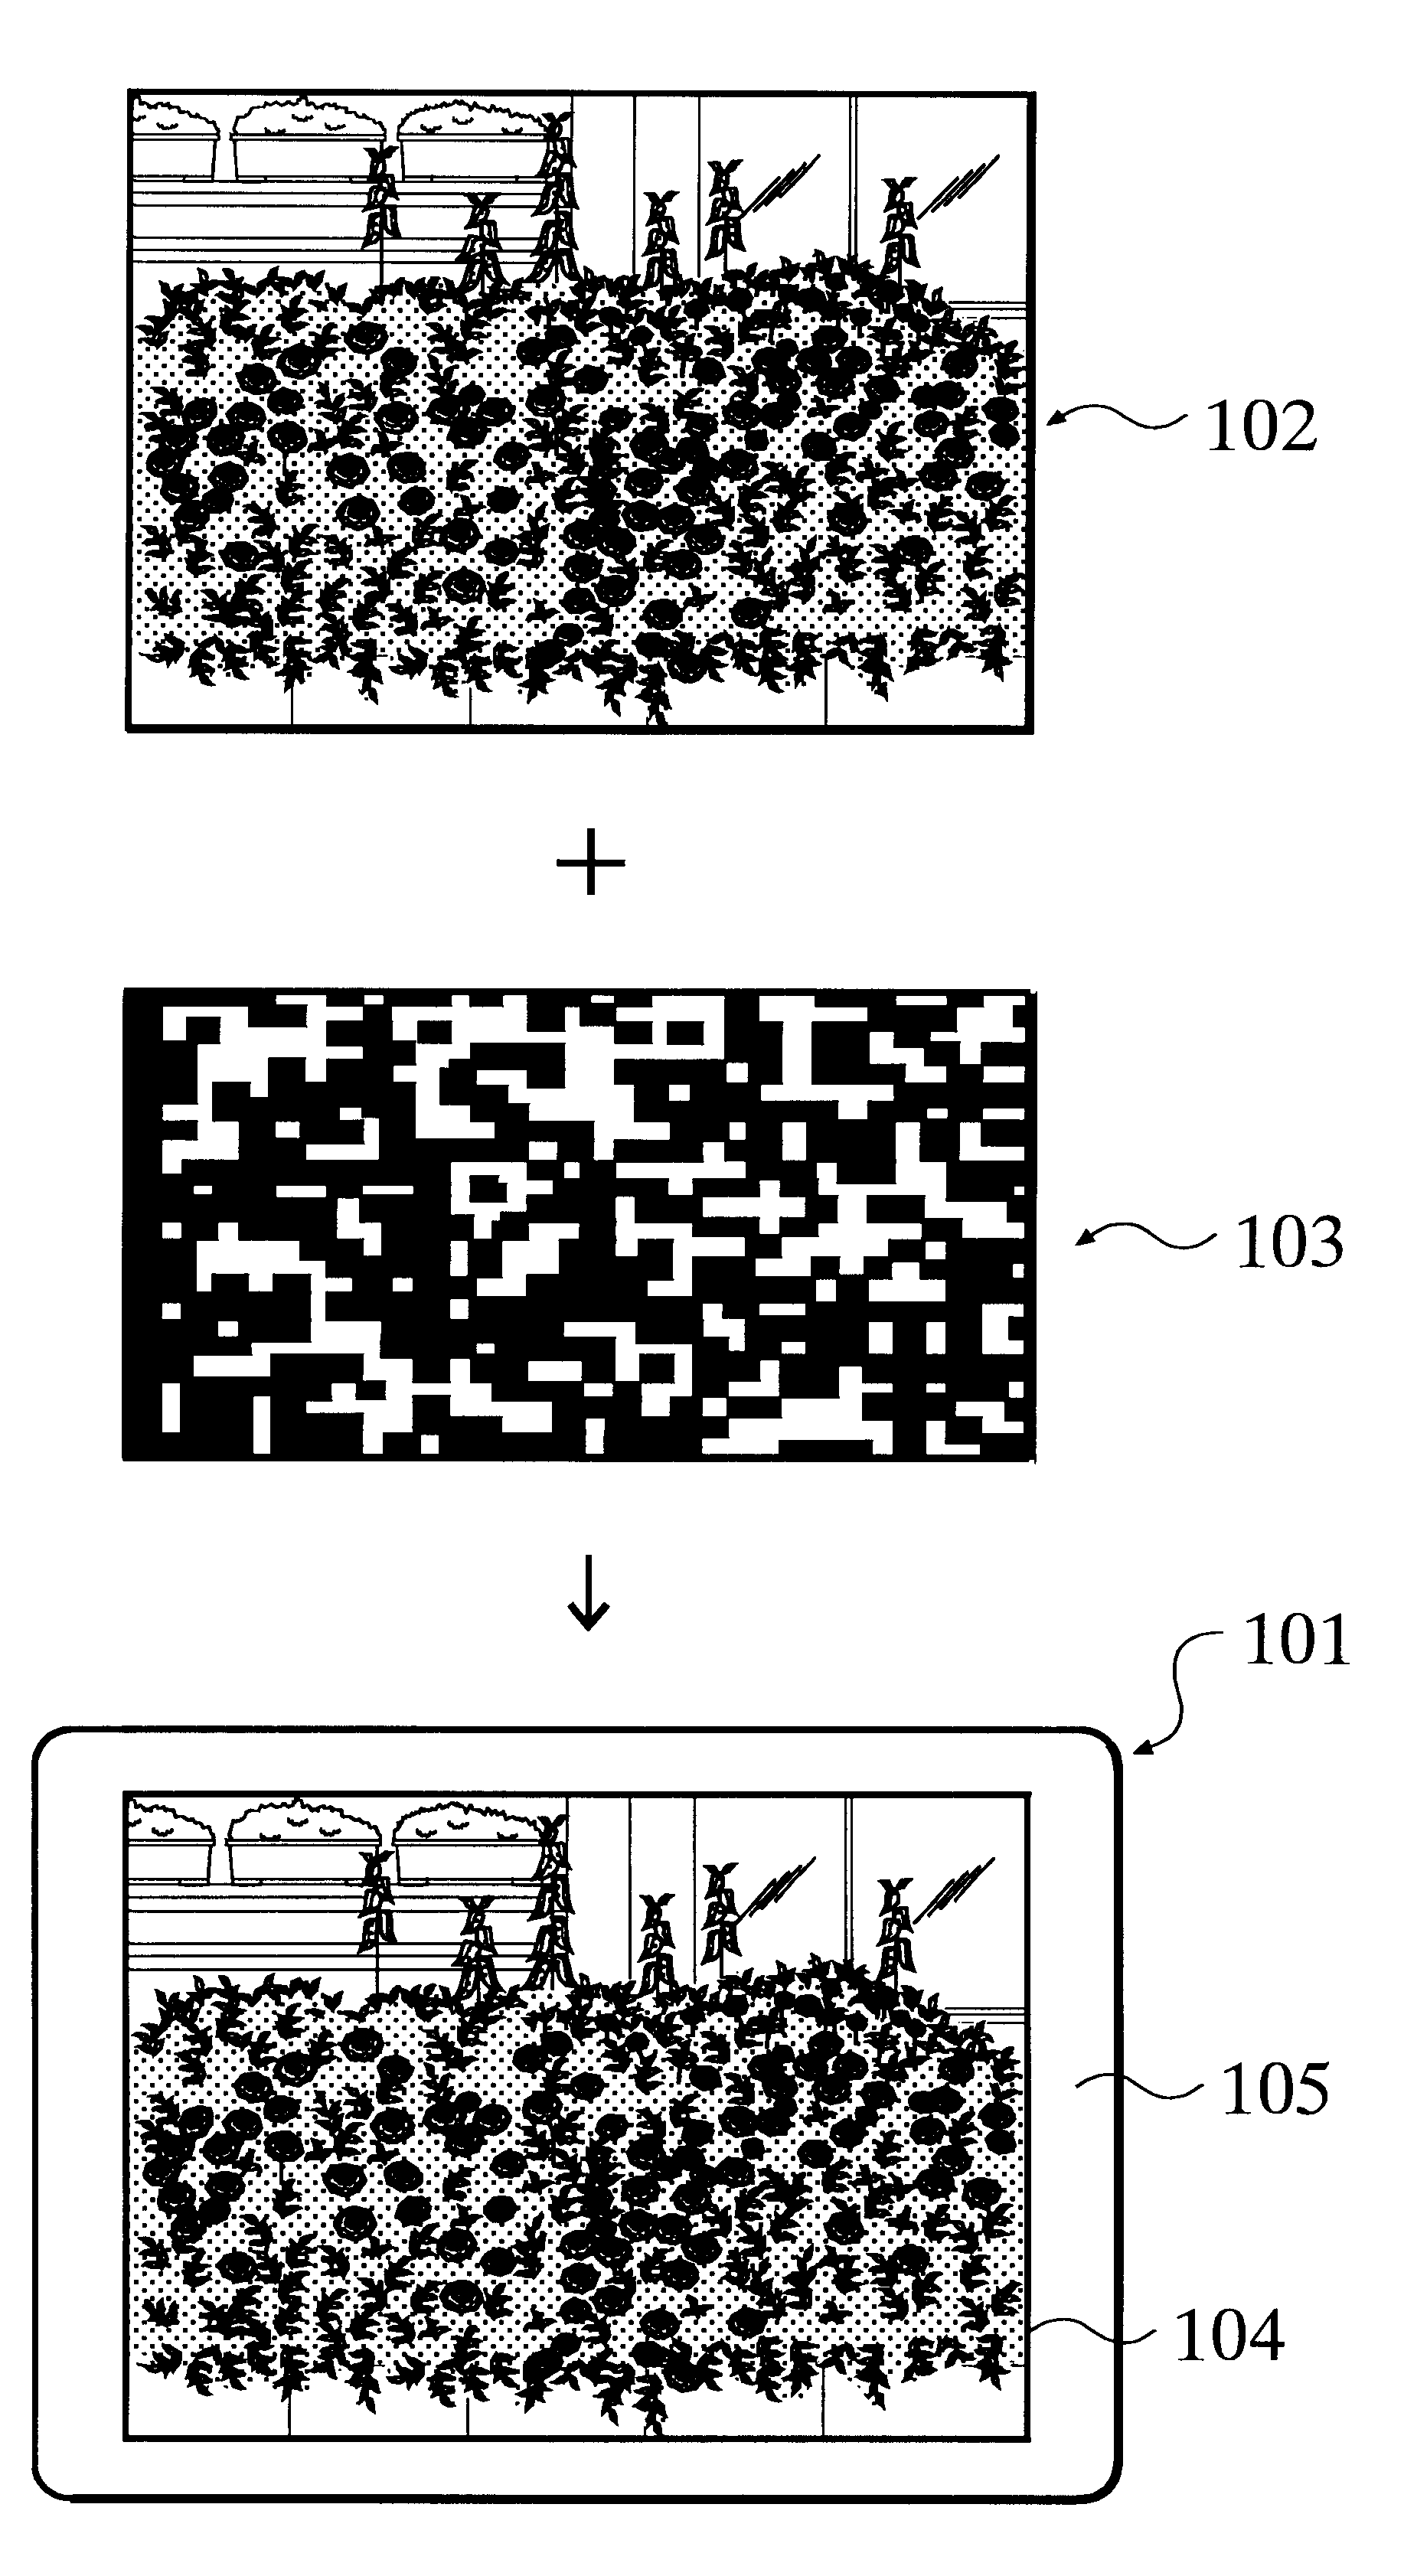 Information code product, manufacturing device and method for manufacturing the same, information code reading device, authentication system, authentication terminal, authentication server, and authentication method